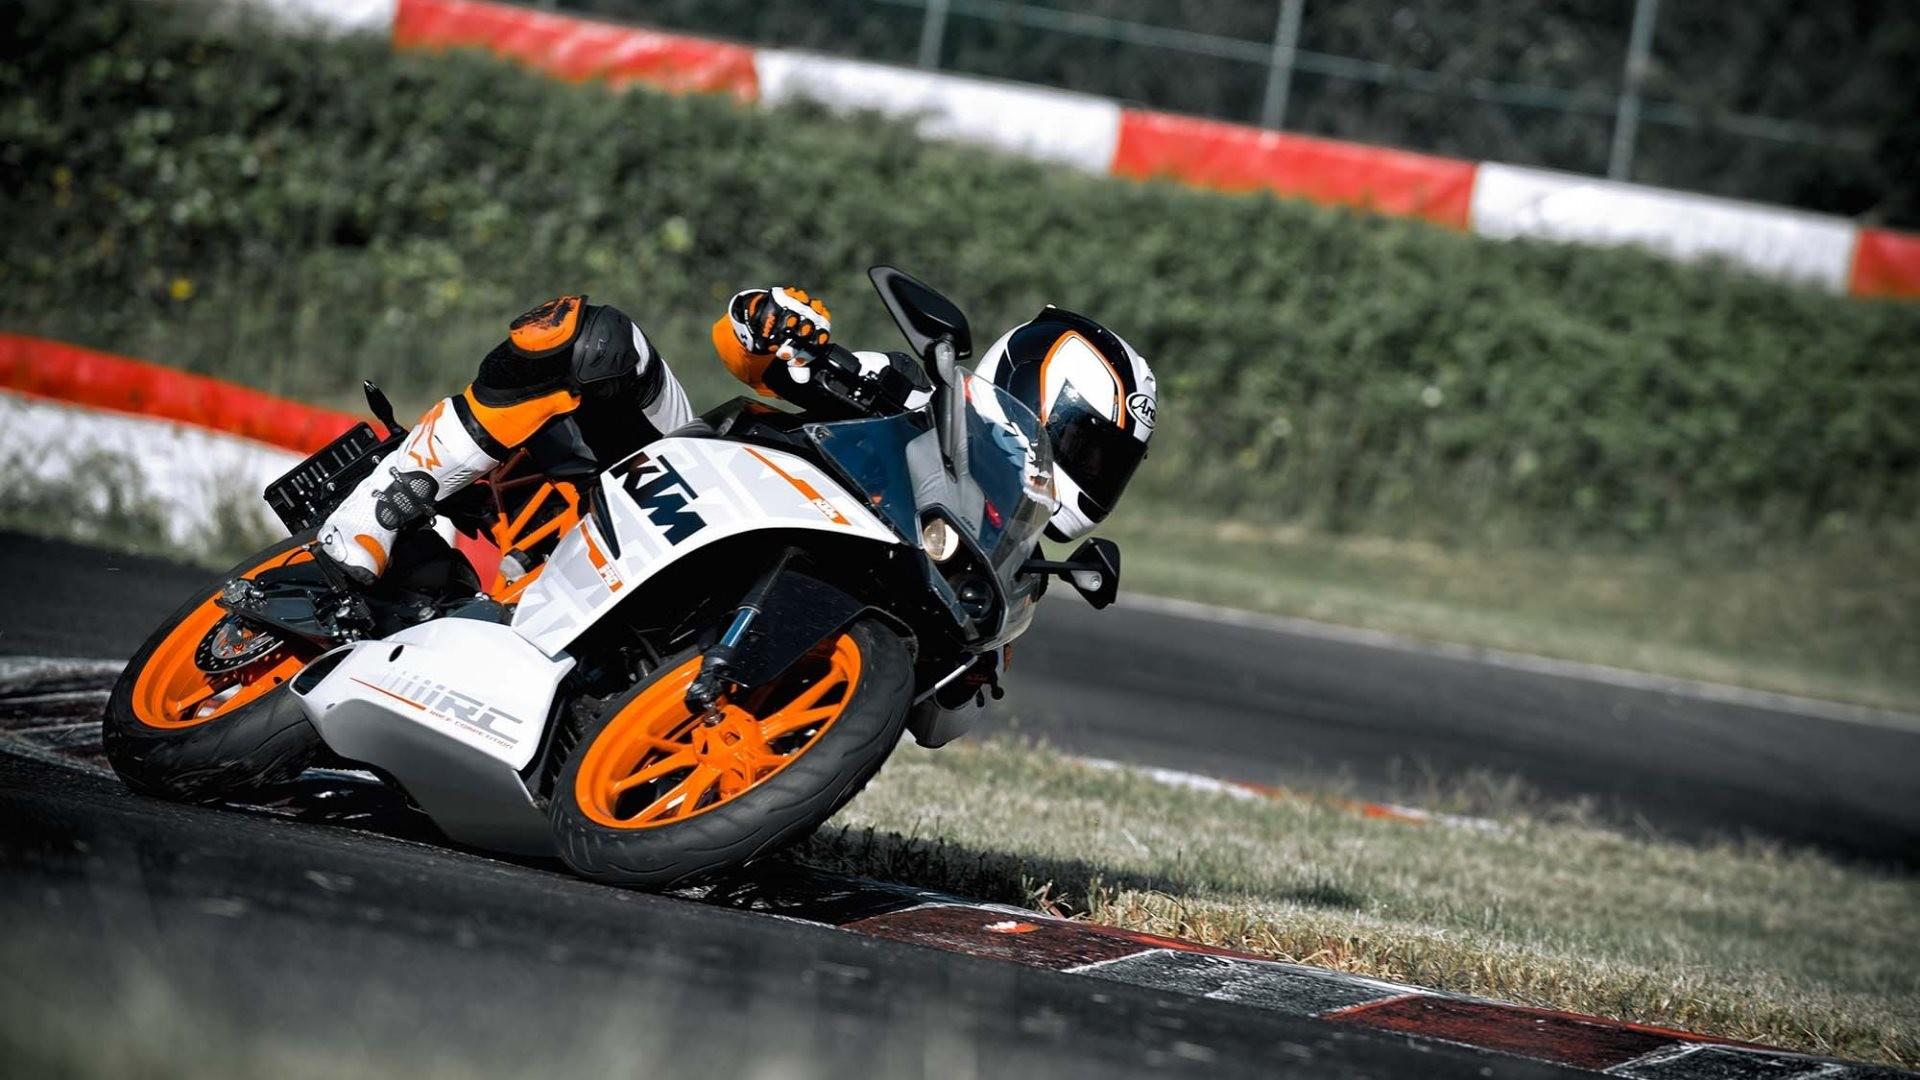 Ktm Rc 390 Wallpaper background picture